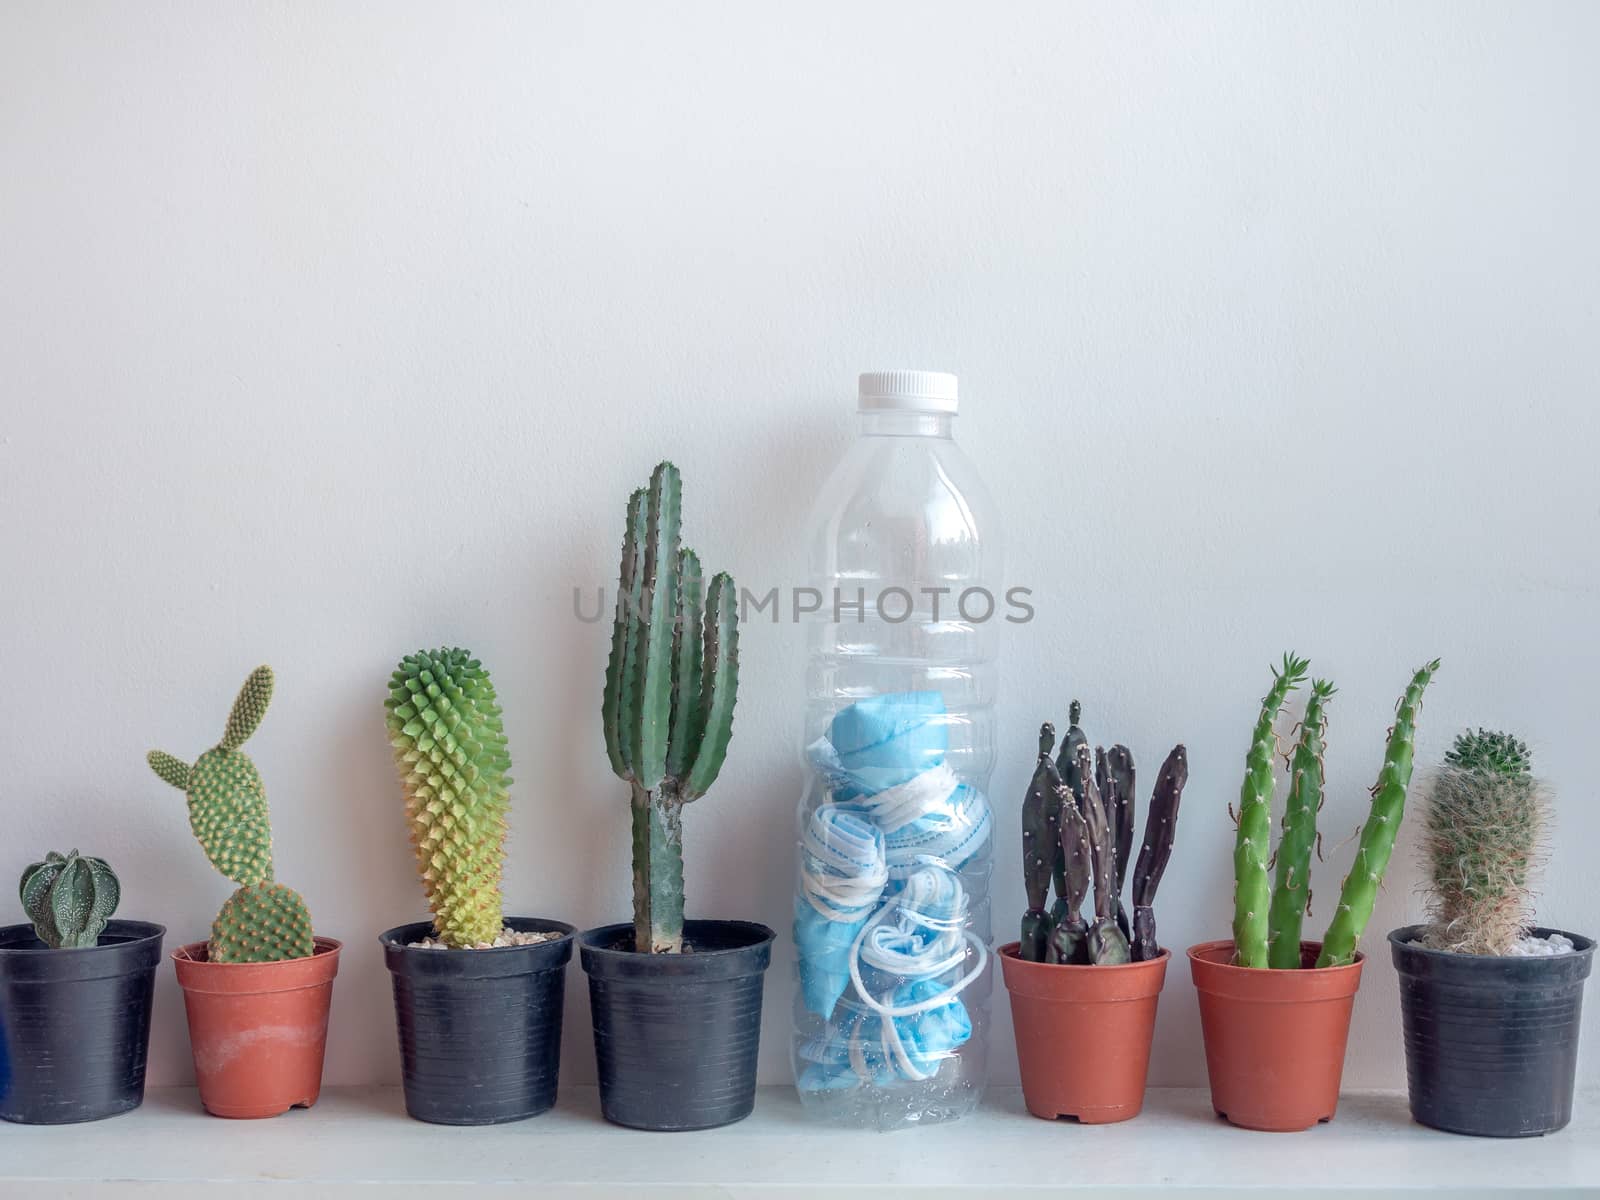 Used mask concept. Folded used protective face mask in plastic bottle with cactus plant on shelf. Protection before littering for prevent spread of virus.